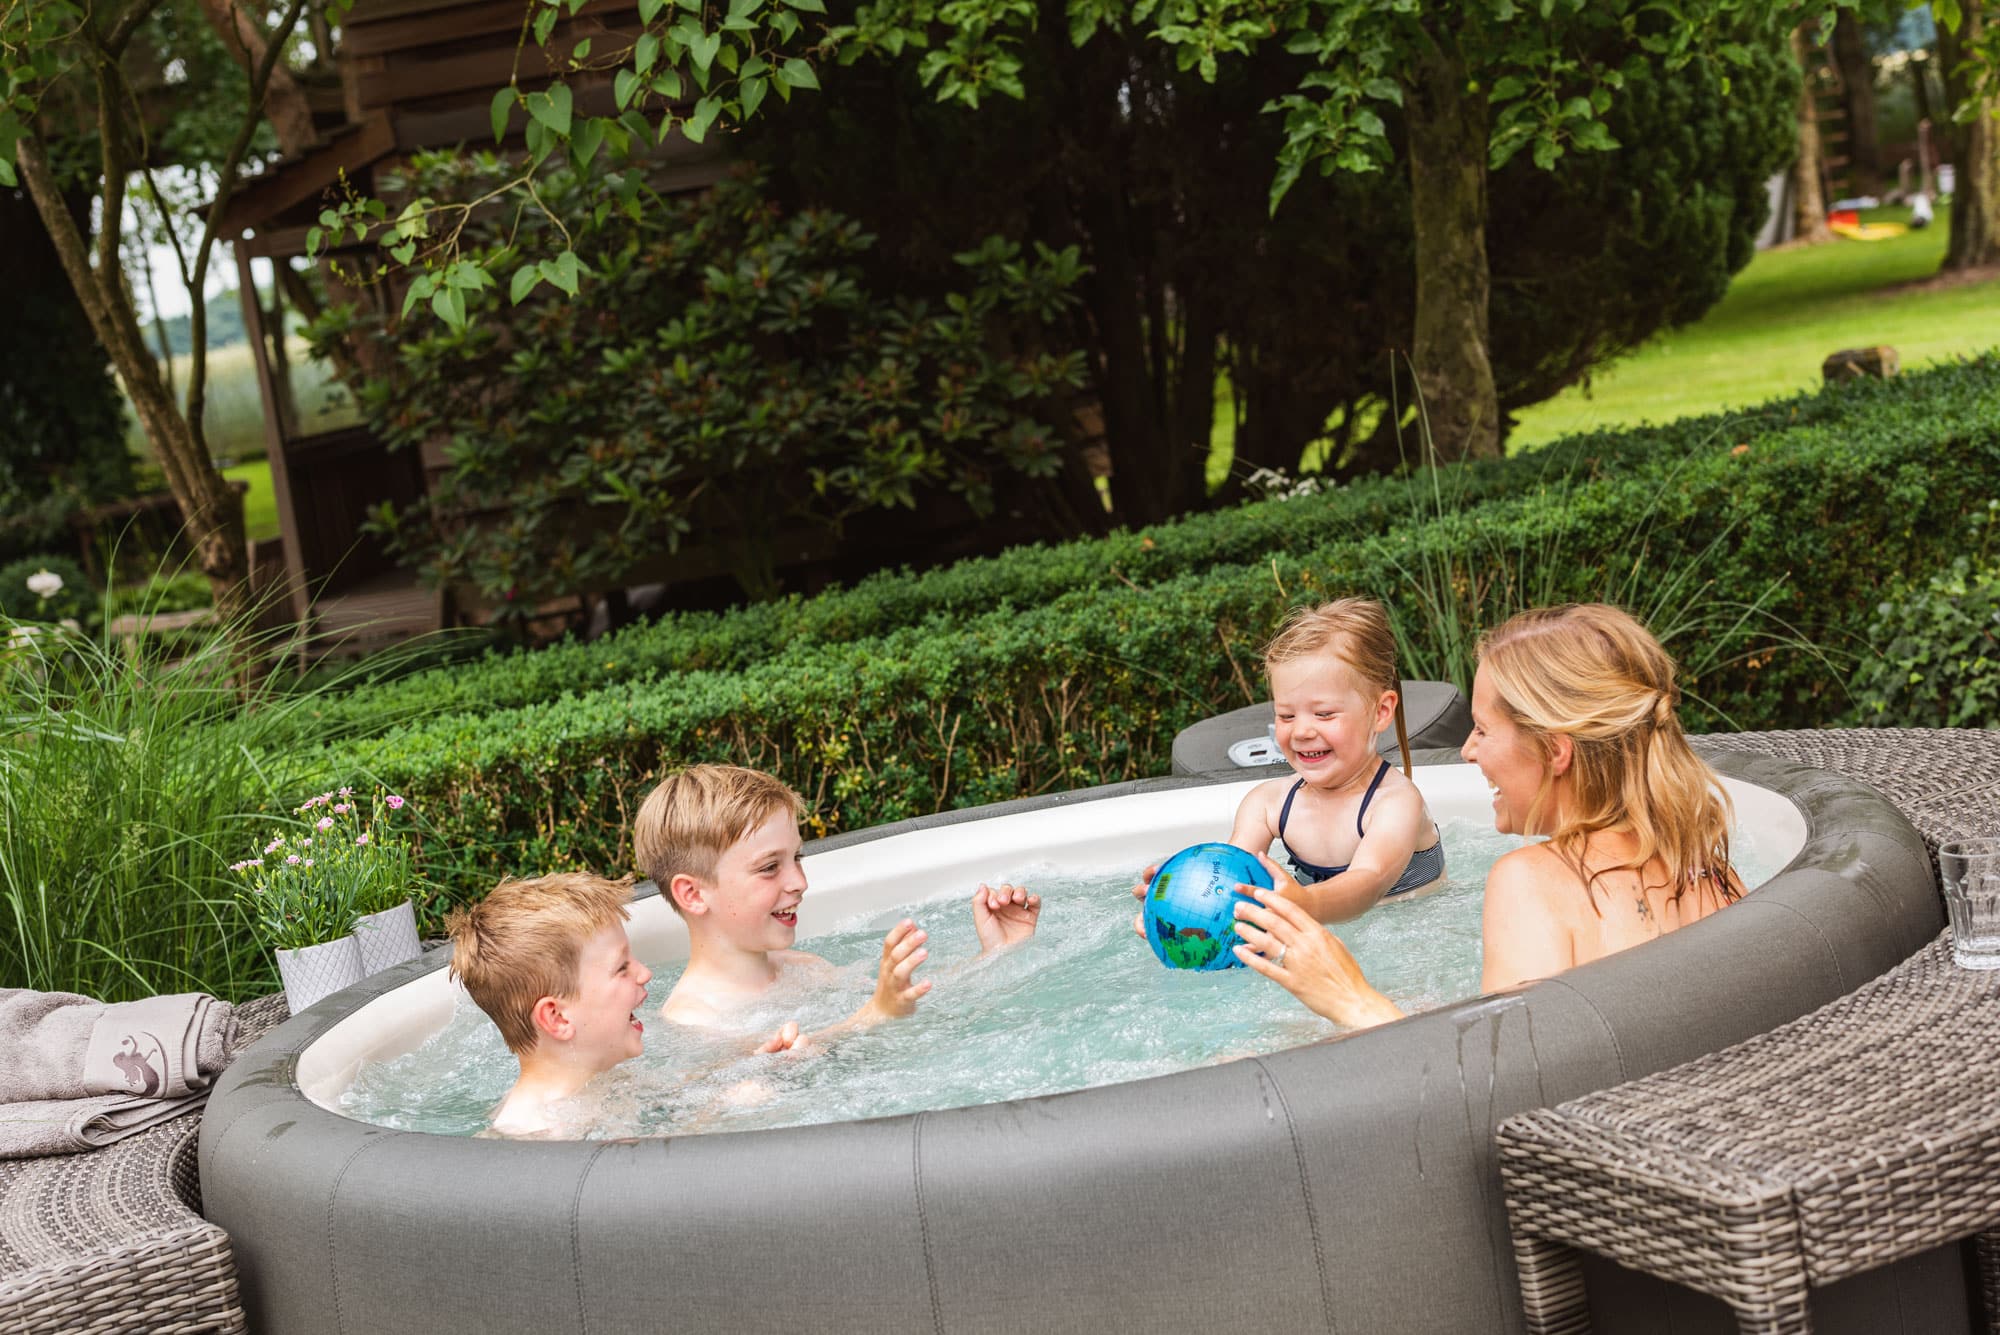 A Softub is a gift for the whole family 